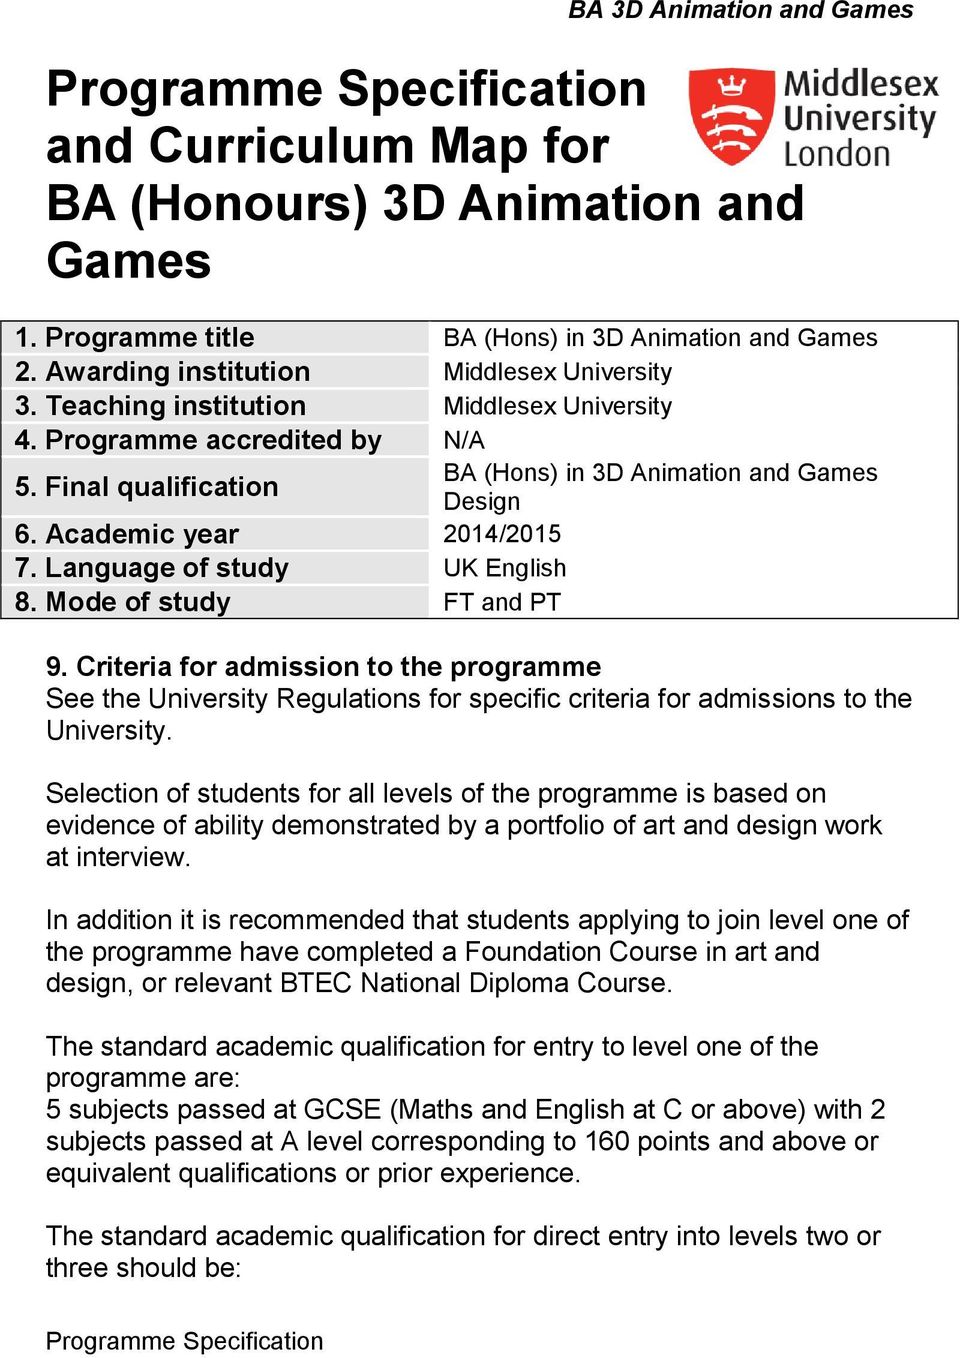 Programme Specification and Curriculum Map for BA (Honours) 3D Animation  and Games - PDF Free Download